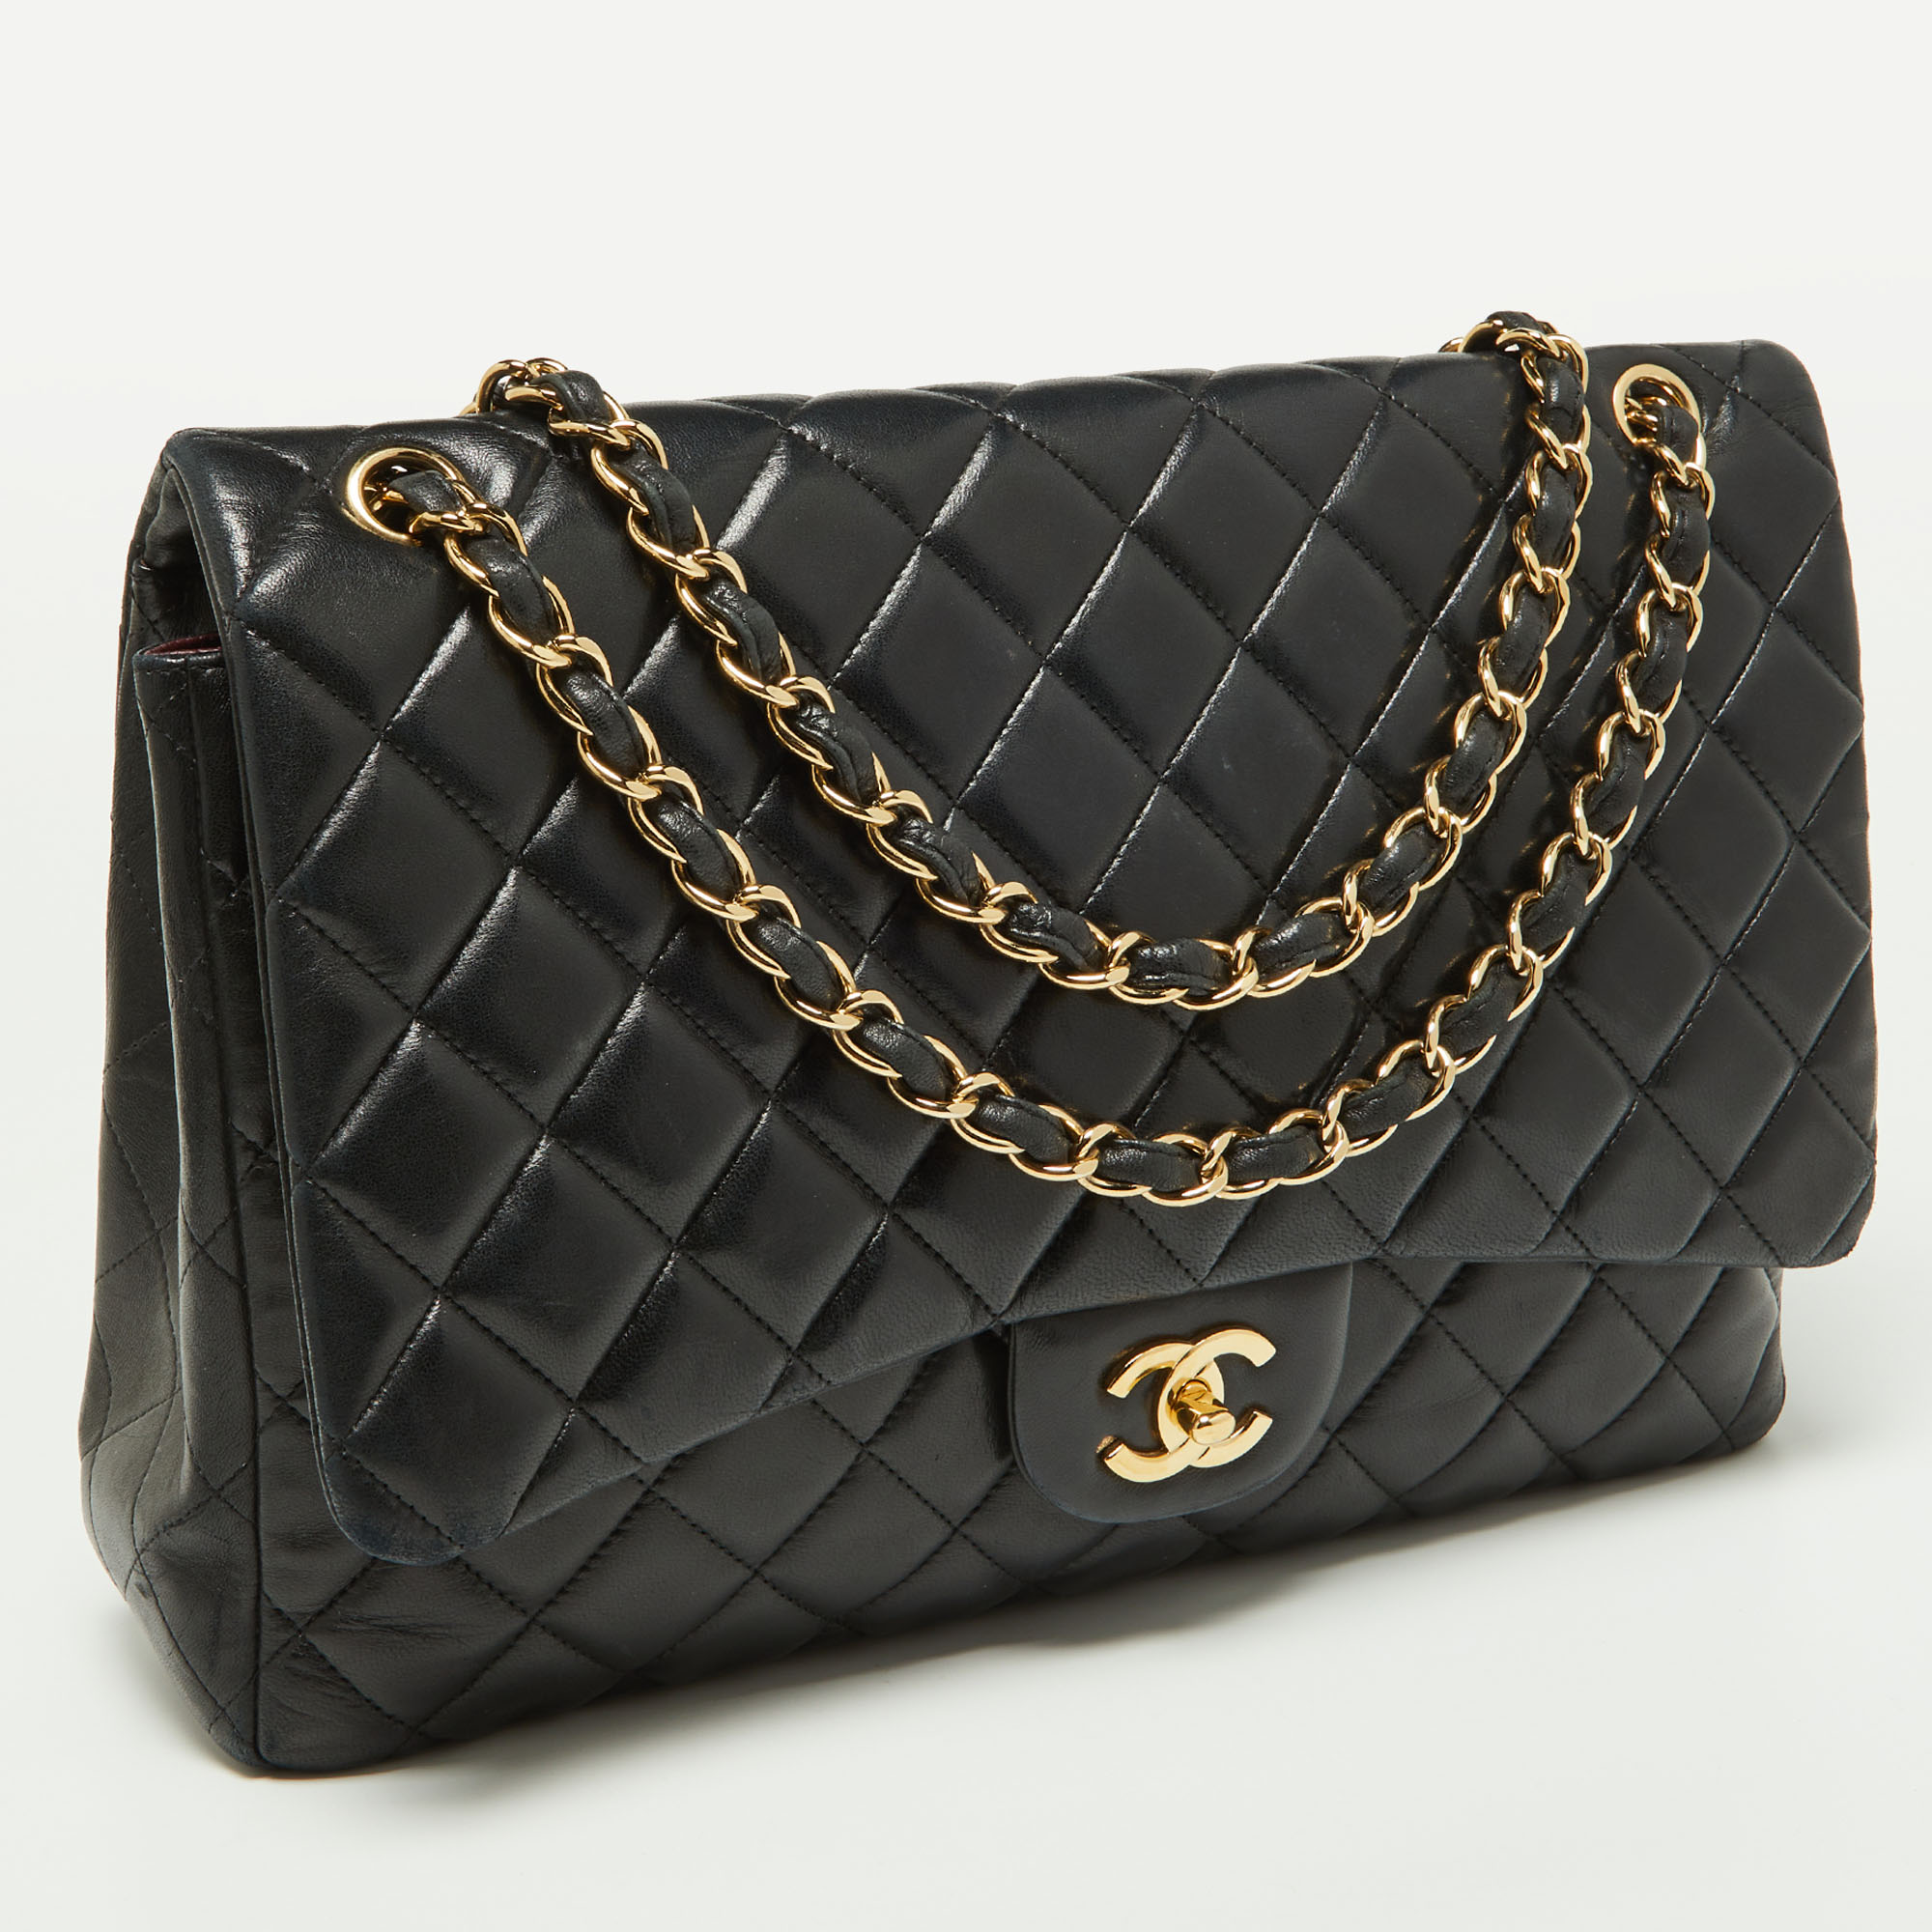 Chanel Black Quilted Lambskin Leather Maxi Classic Double Flap Bag